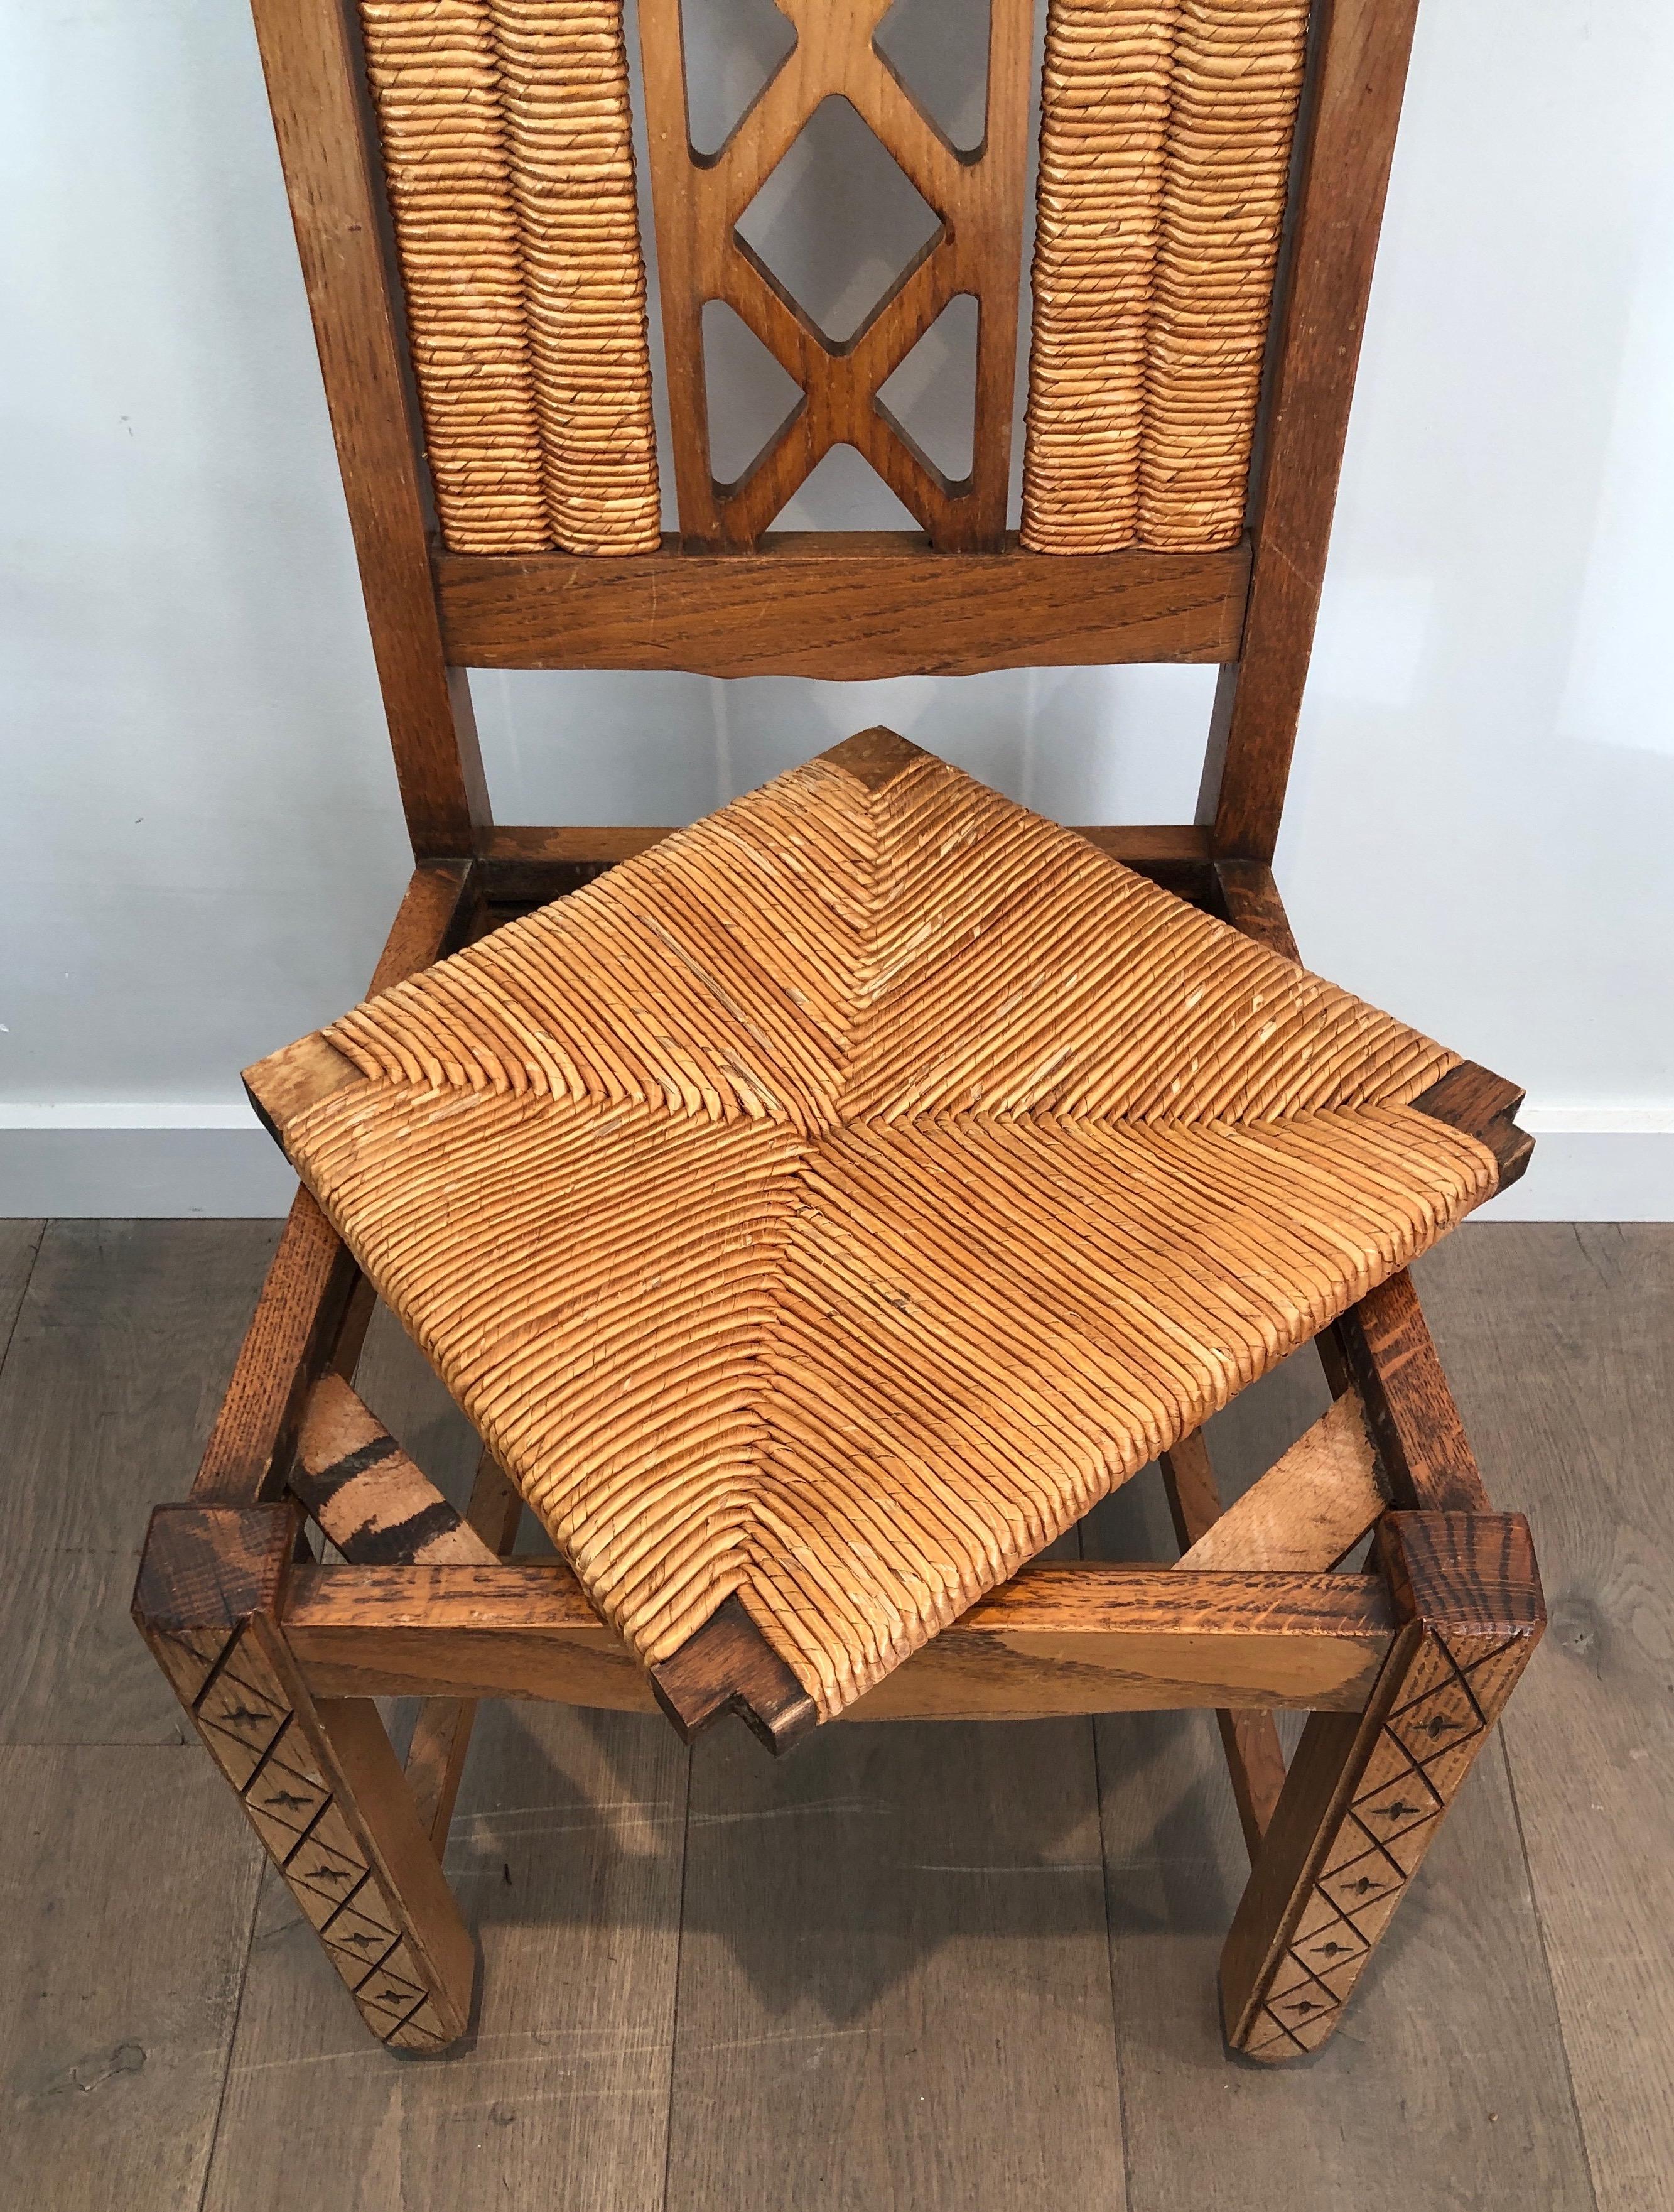 Set of 6 Brutalist Chairs Made of Ash and Straw, French Work, Circa 1950 For Sale 7